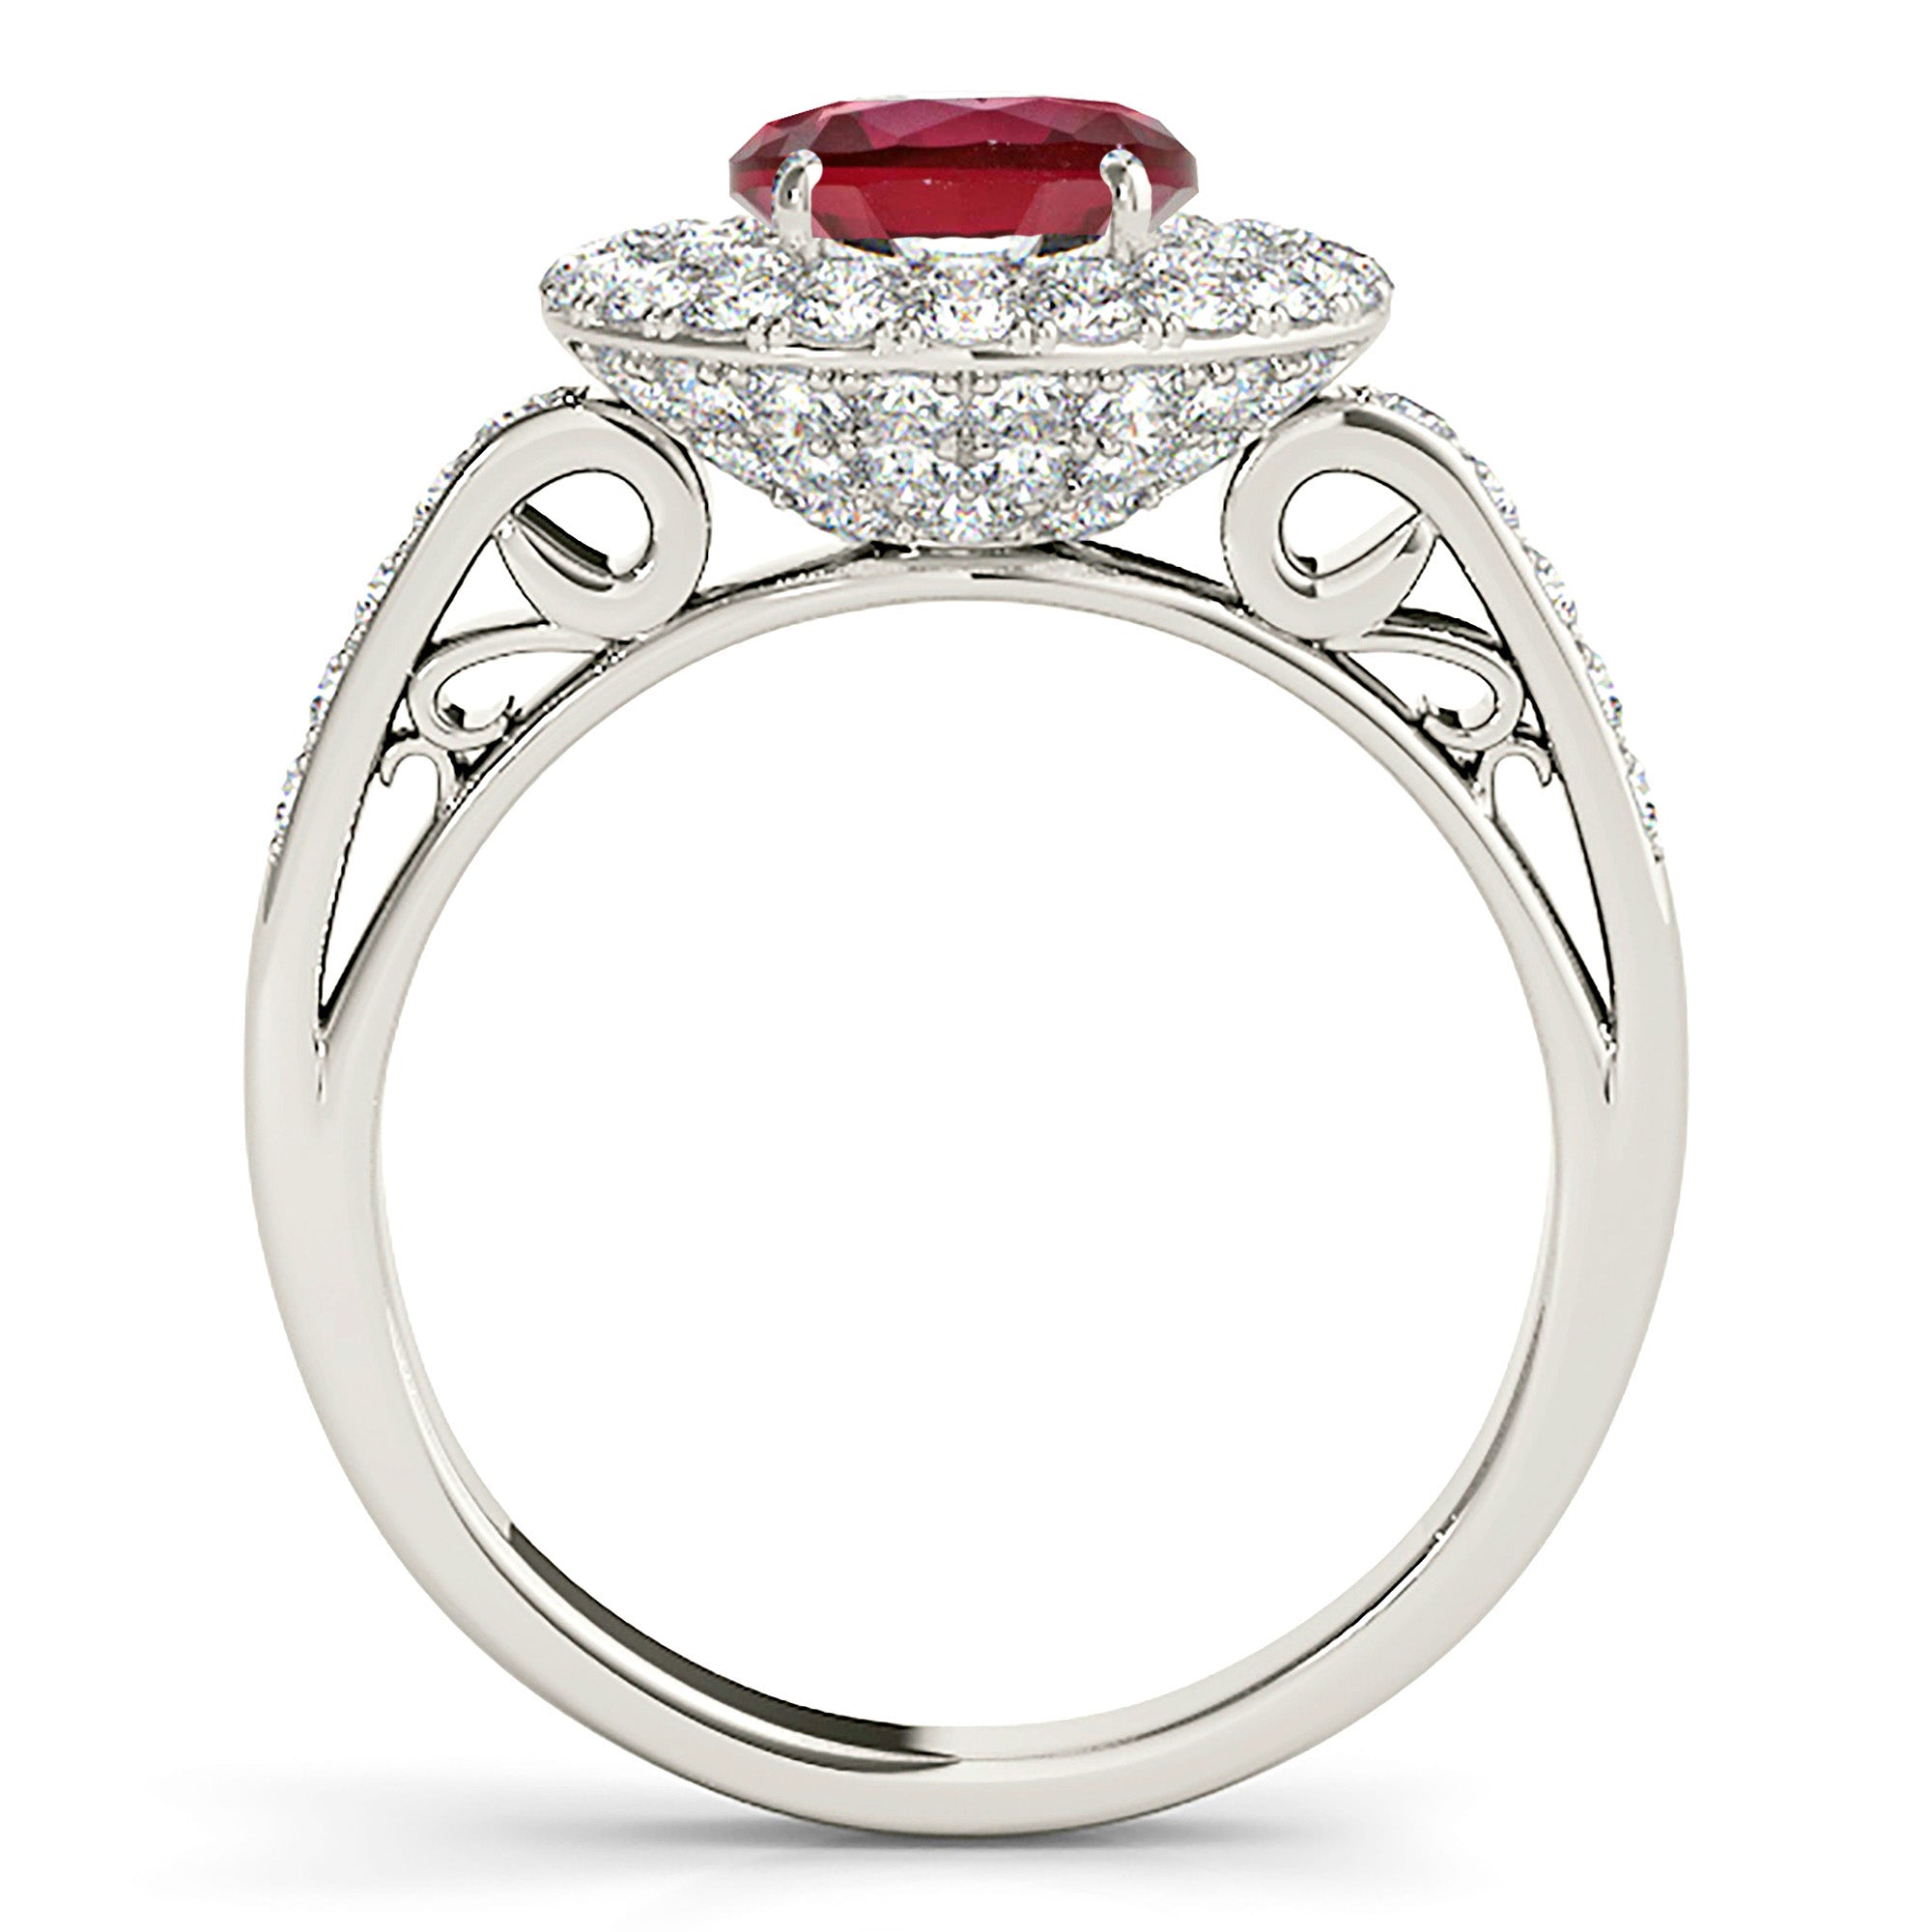 1.35 ct. Genuine Ruby Ring With 1.00 ctw. Diamond 3 D Halo and Hand Carved Diamond Band-in 14K/18K White, Yellow, Rose Gold and Platinum - Christmas Jewelry Gift -VIRABYANI